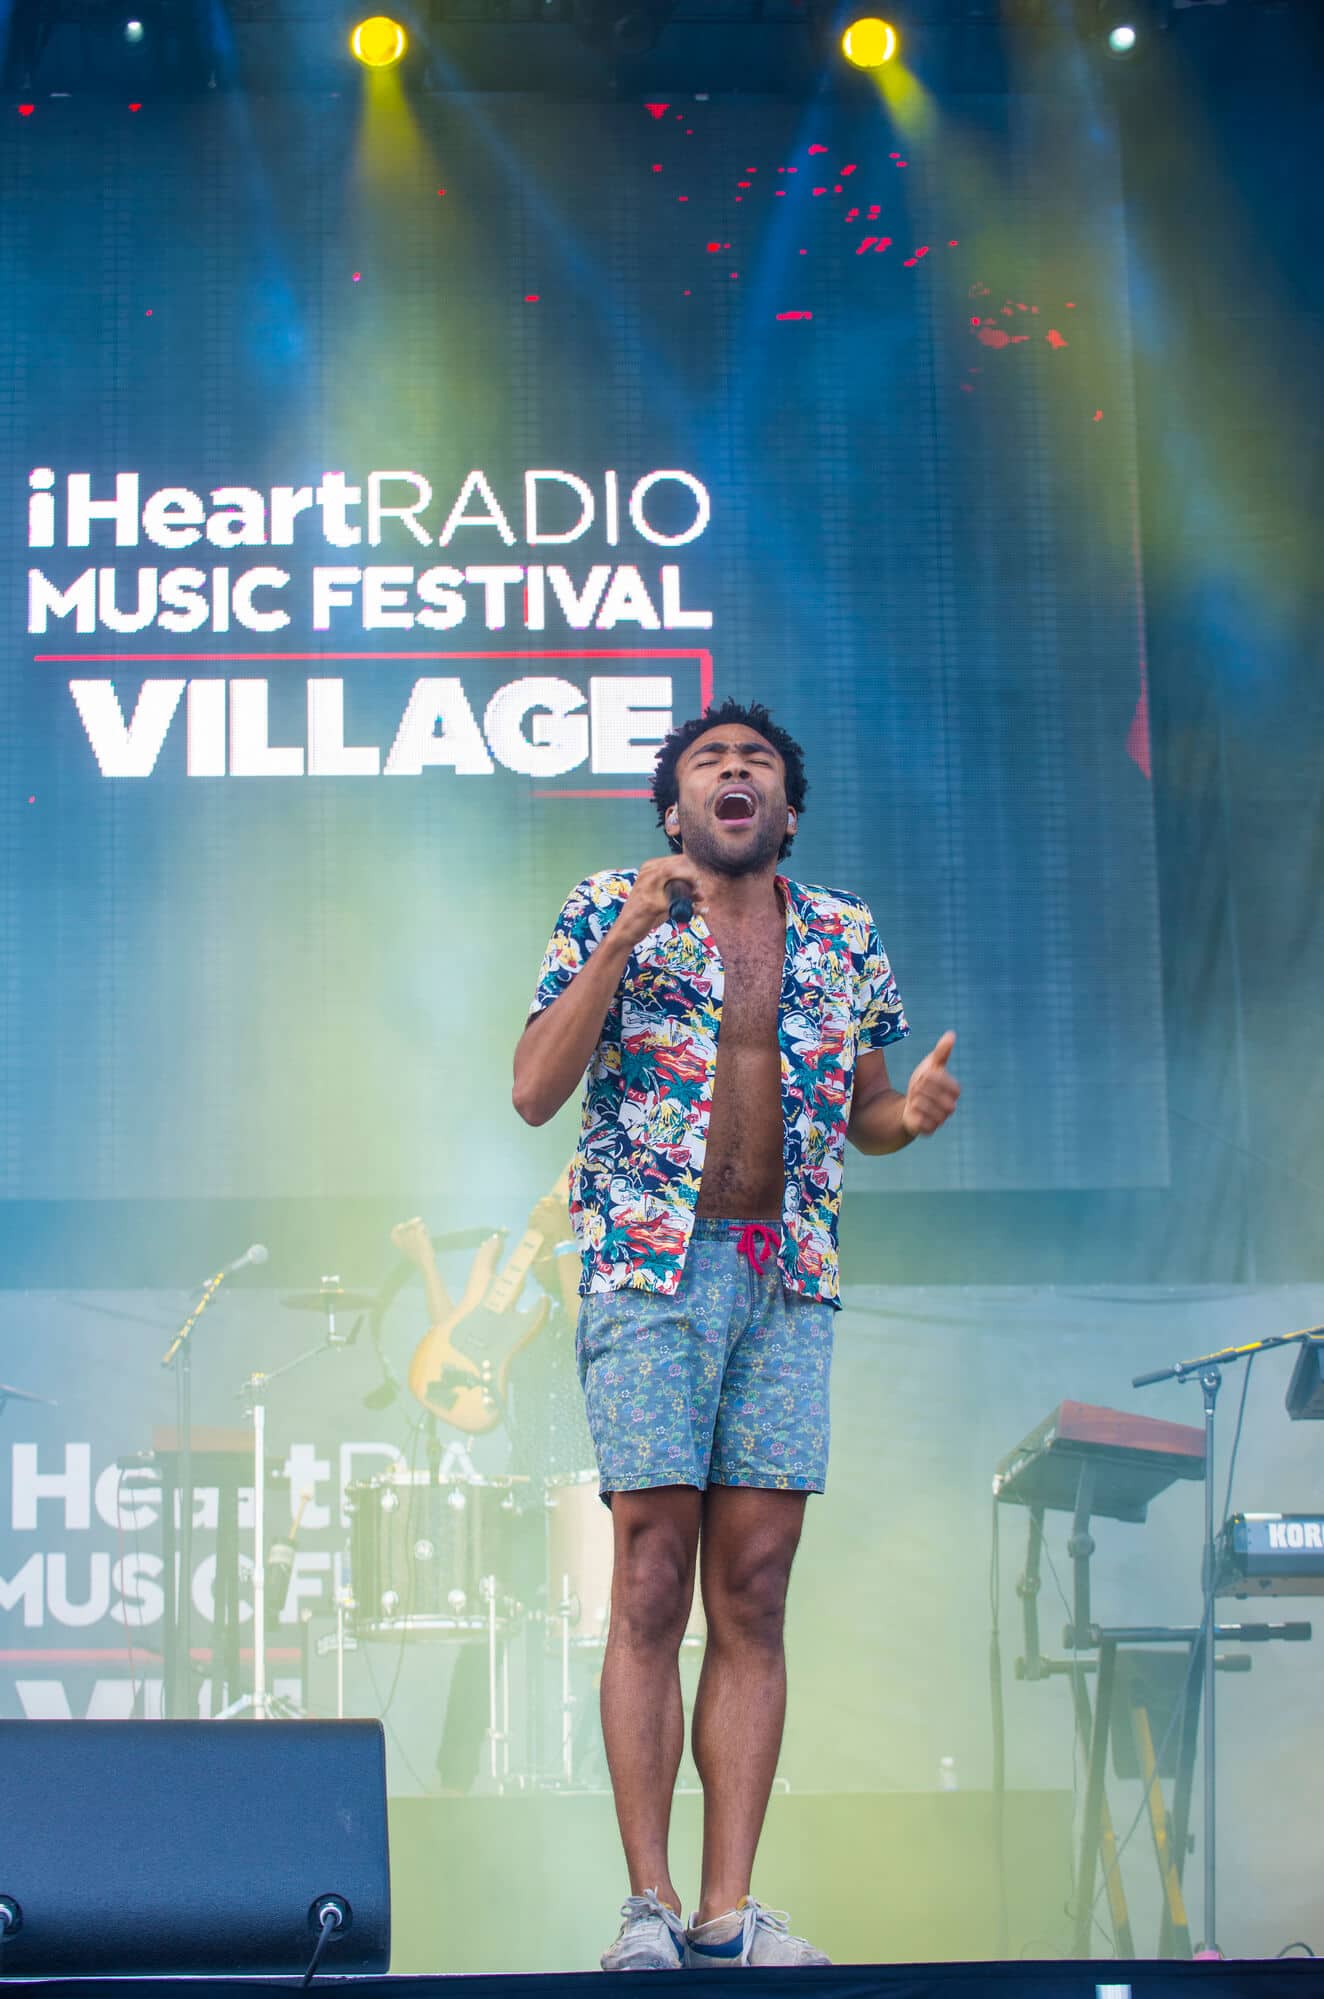 Donald Glover performs at IHeartRadio music festival